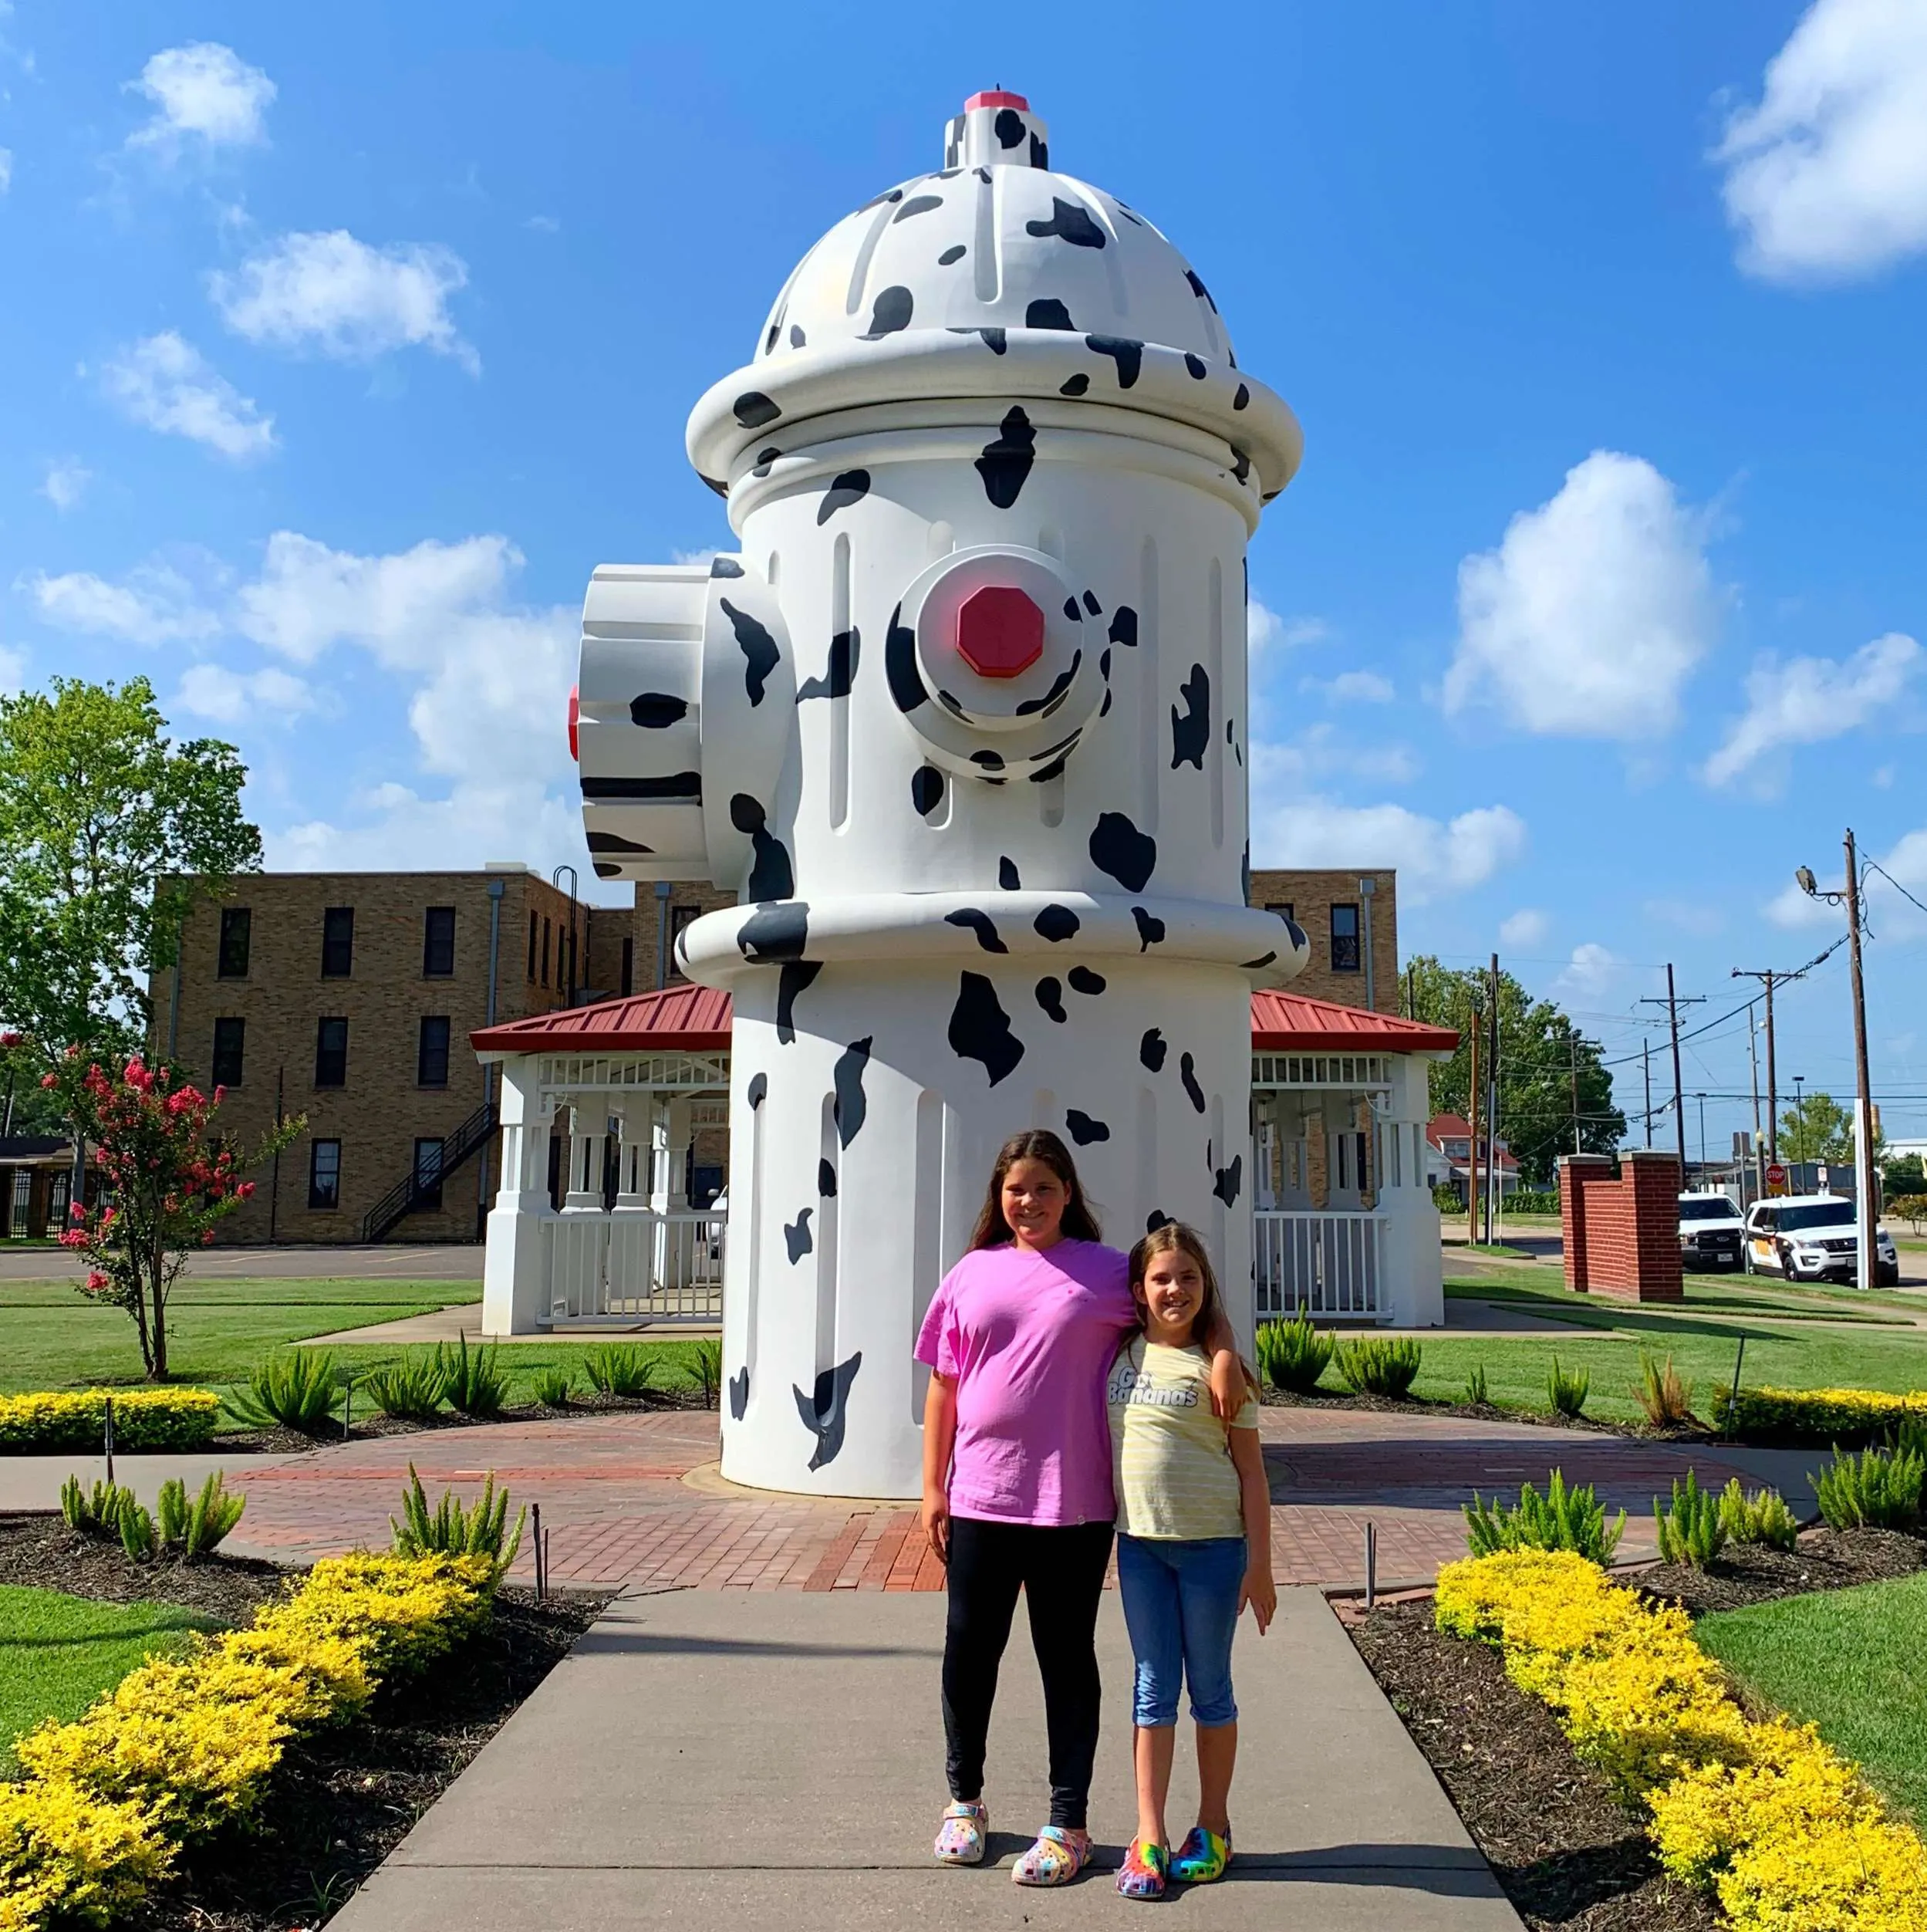 World's largest fire hydrant in Beaumont, TX.